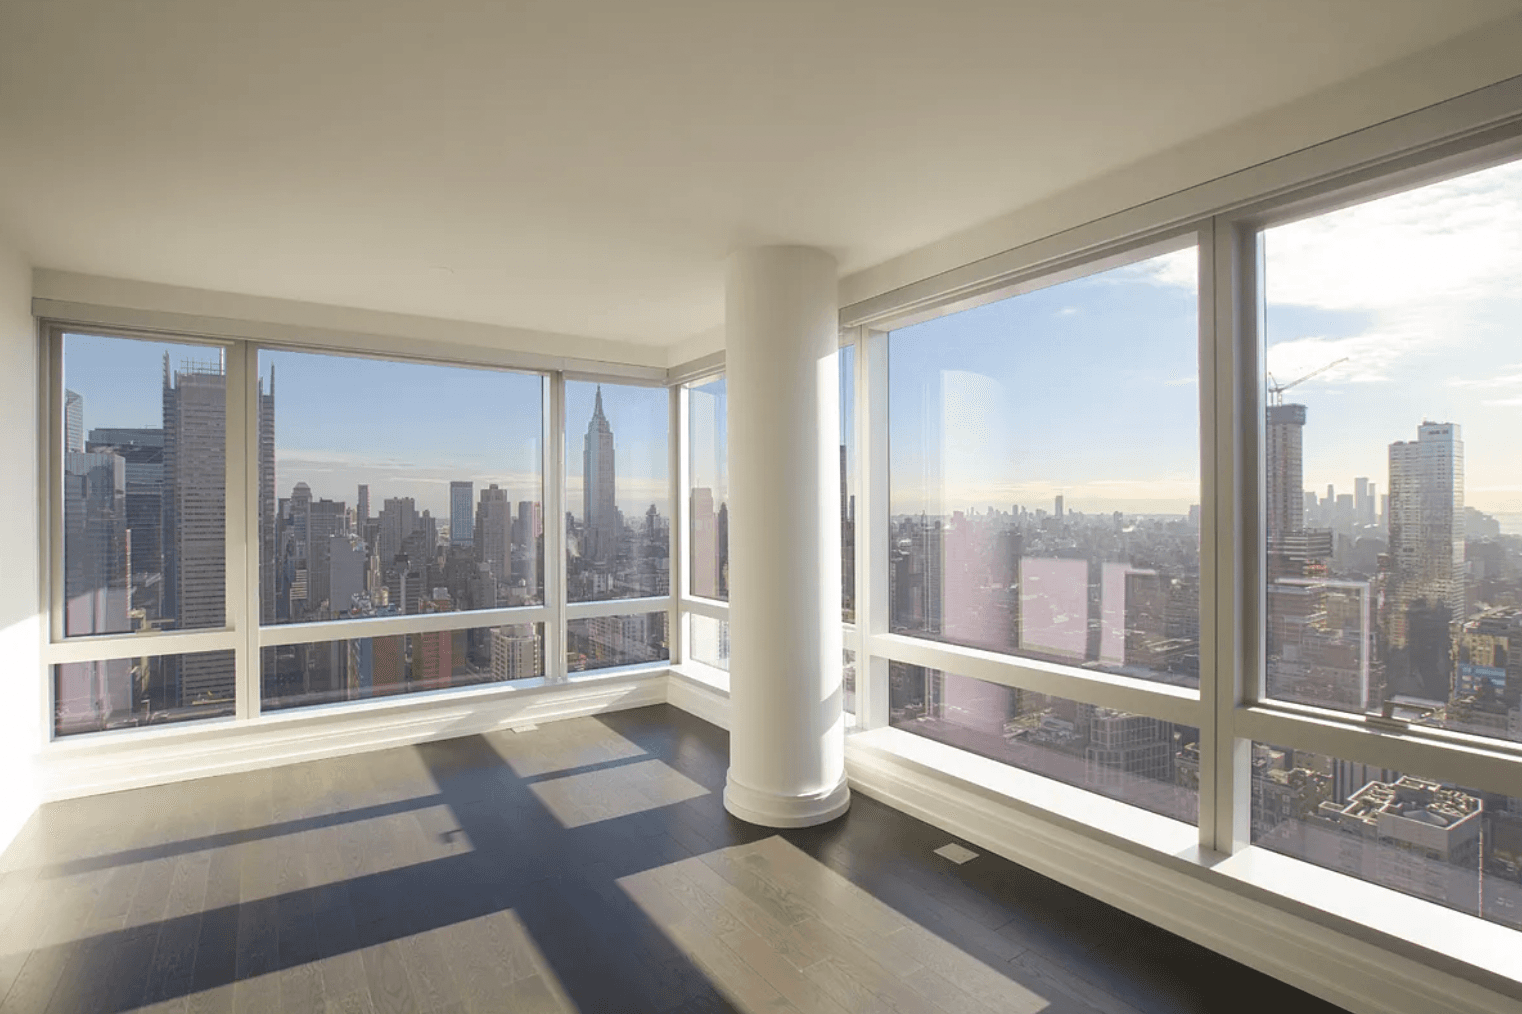 Luxury 3 Bed/3 Baths Amenity filled building in Hudson Yards, W/D in Unit